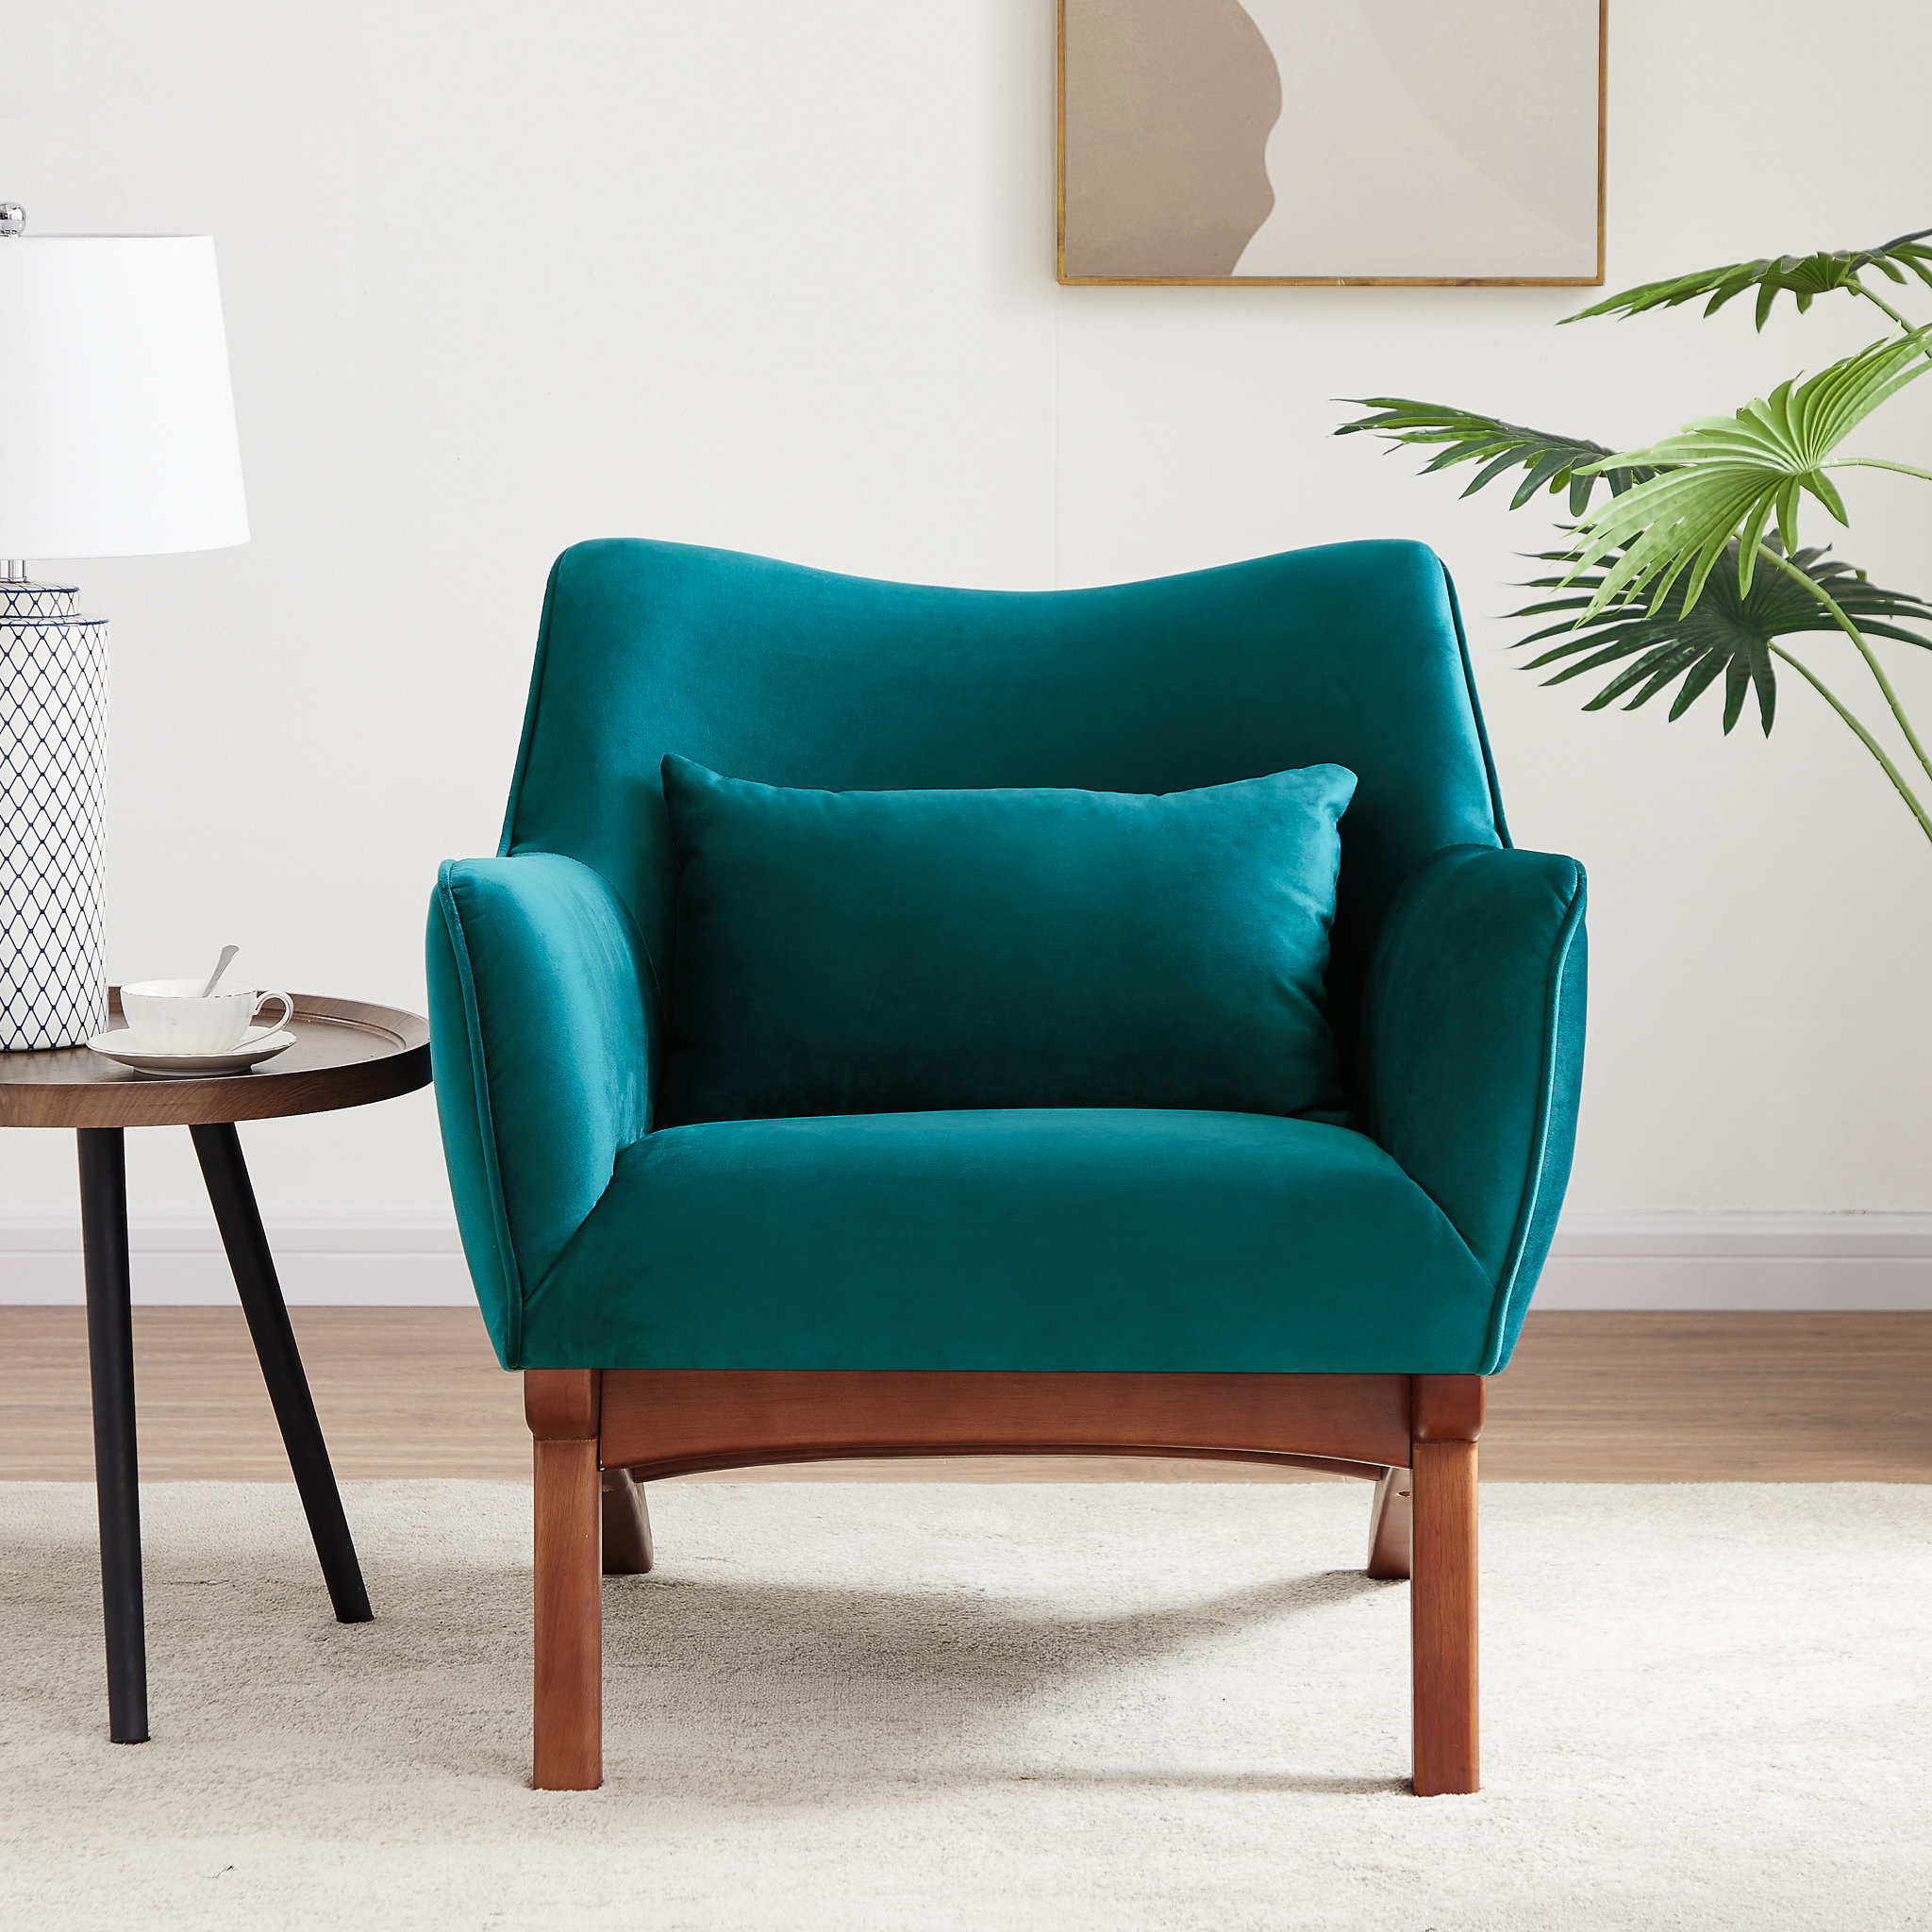 The Most Comfortable Accent Chair Options for Home Decor - Bob Vila